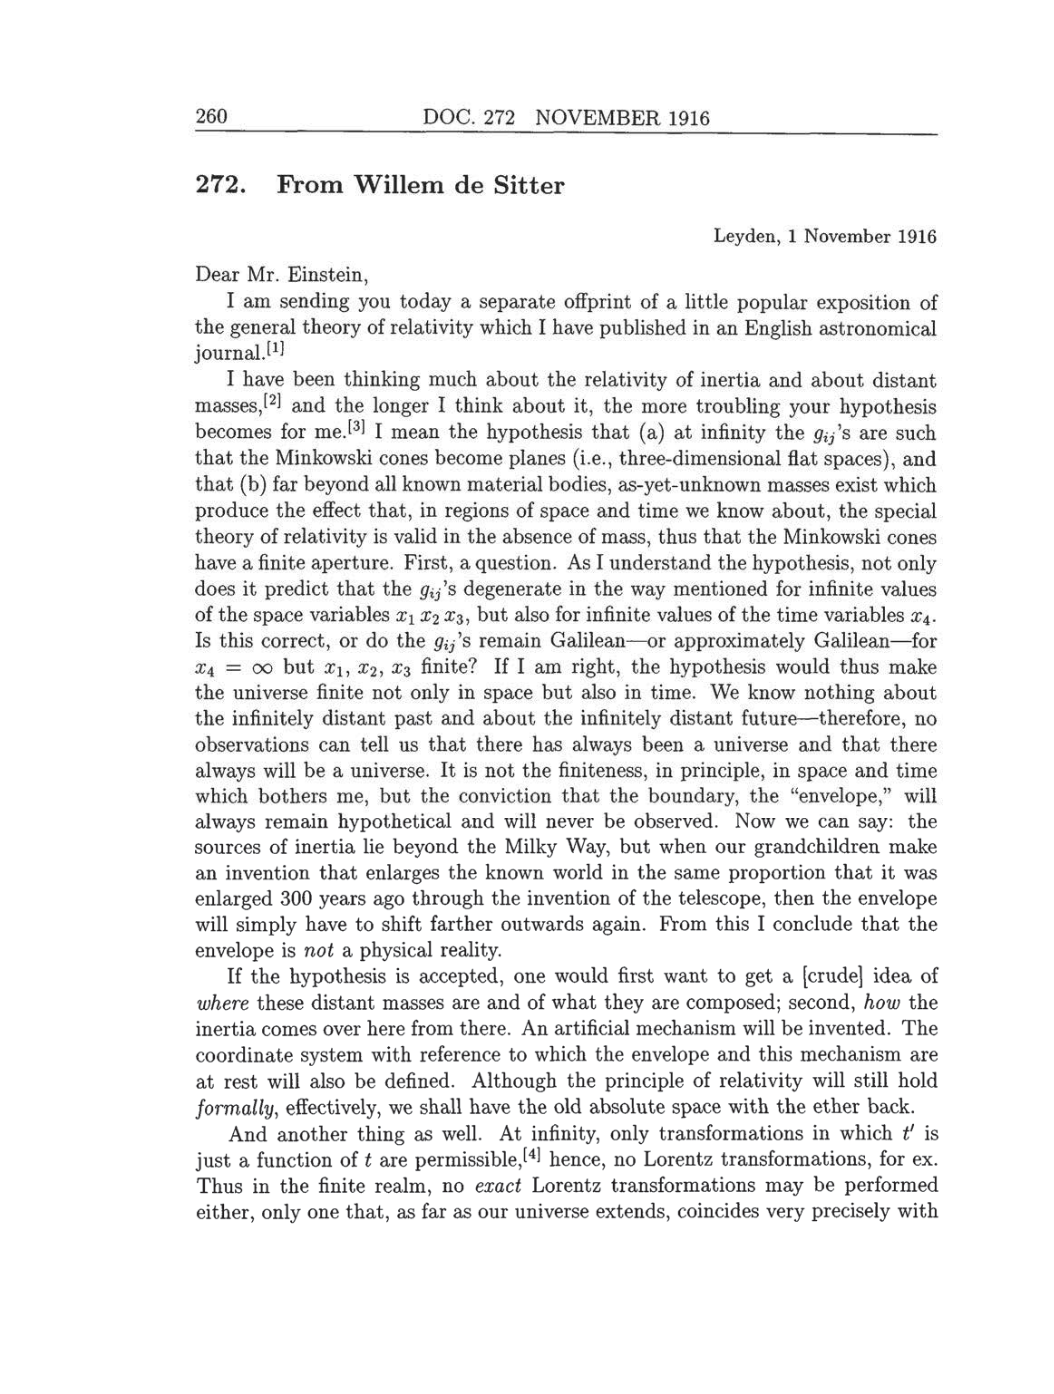 Volume 8: The Berlin Years: Correspondence, 1914-1918 (English translation supplement) page 260